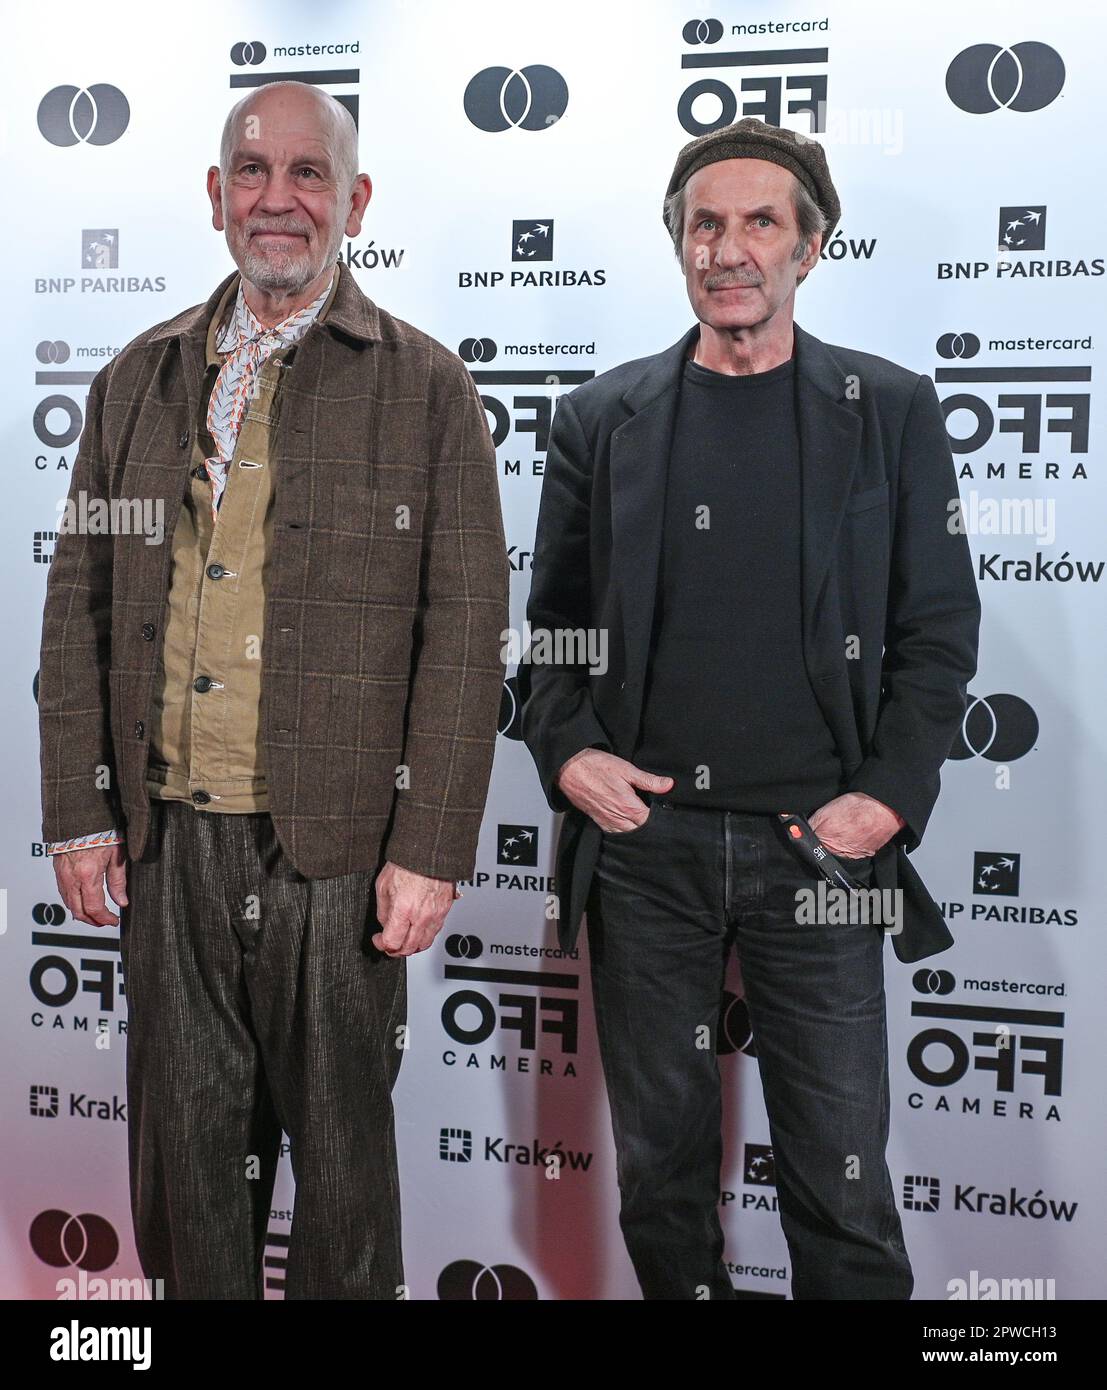 KRAKOW, POLAND - APRIL 28, 2023: American actor John Malkovich (L) arrives at the screening of 'Last Call' accompanied by one of the movie producers, Jacek Szumlas (R), are seen at the opening gala of the International Festival of Independent Cinema Mastercard OFF CAMERA in Krakow, on April 28, 2023, in Krakow, Poland. (Photo by Artur Widak/NurPhoto) Stock Photo